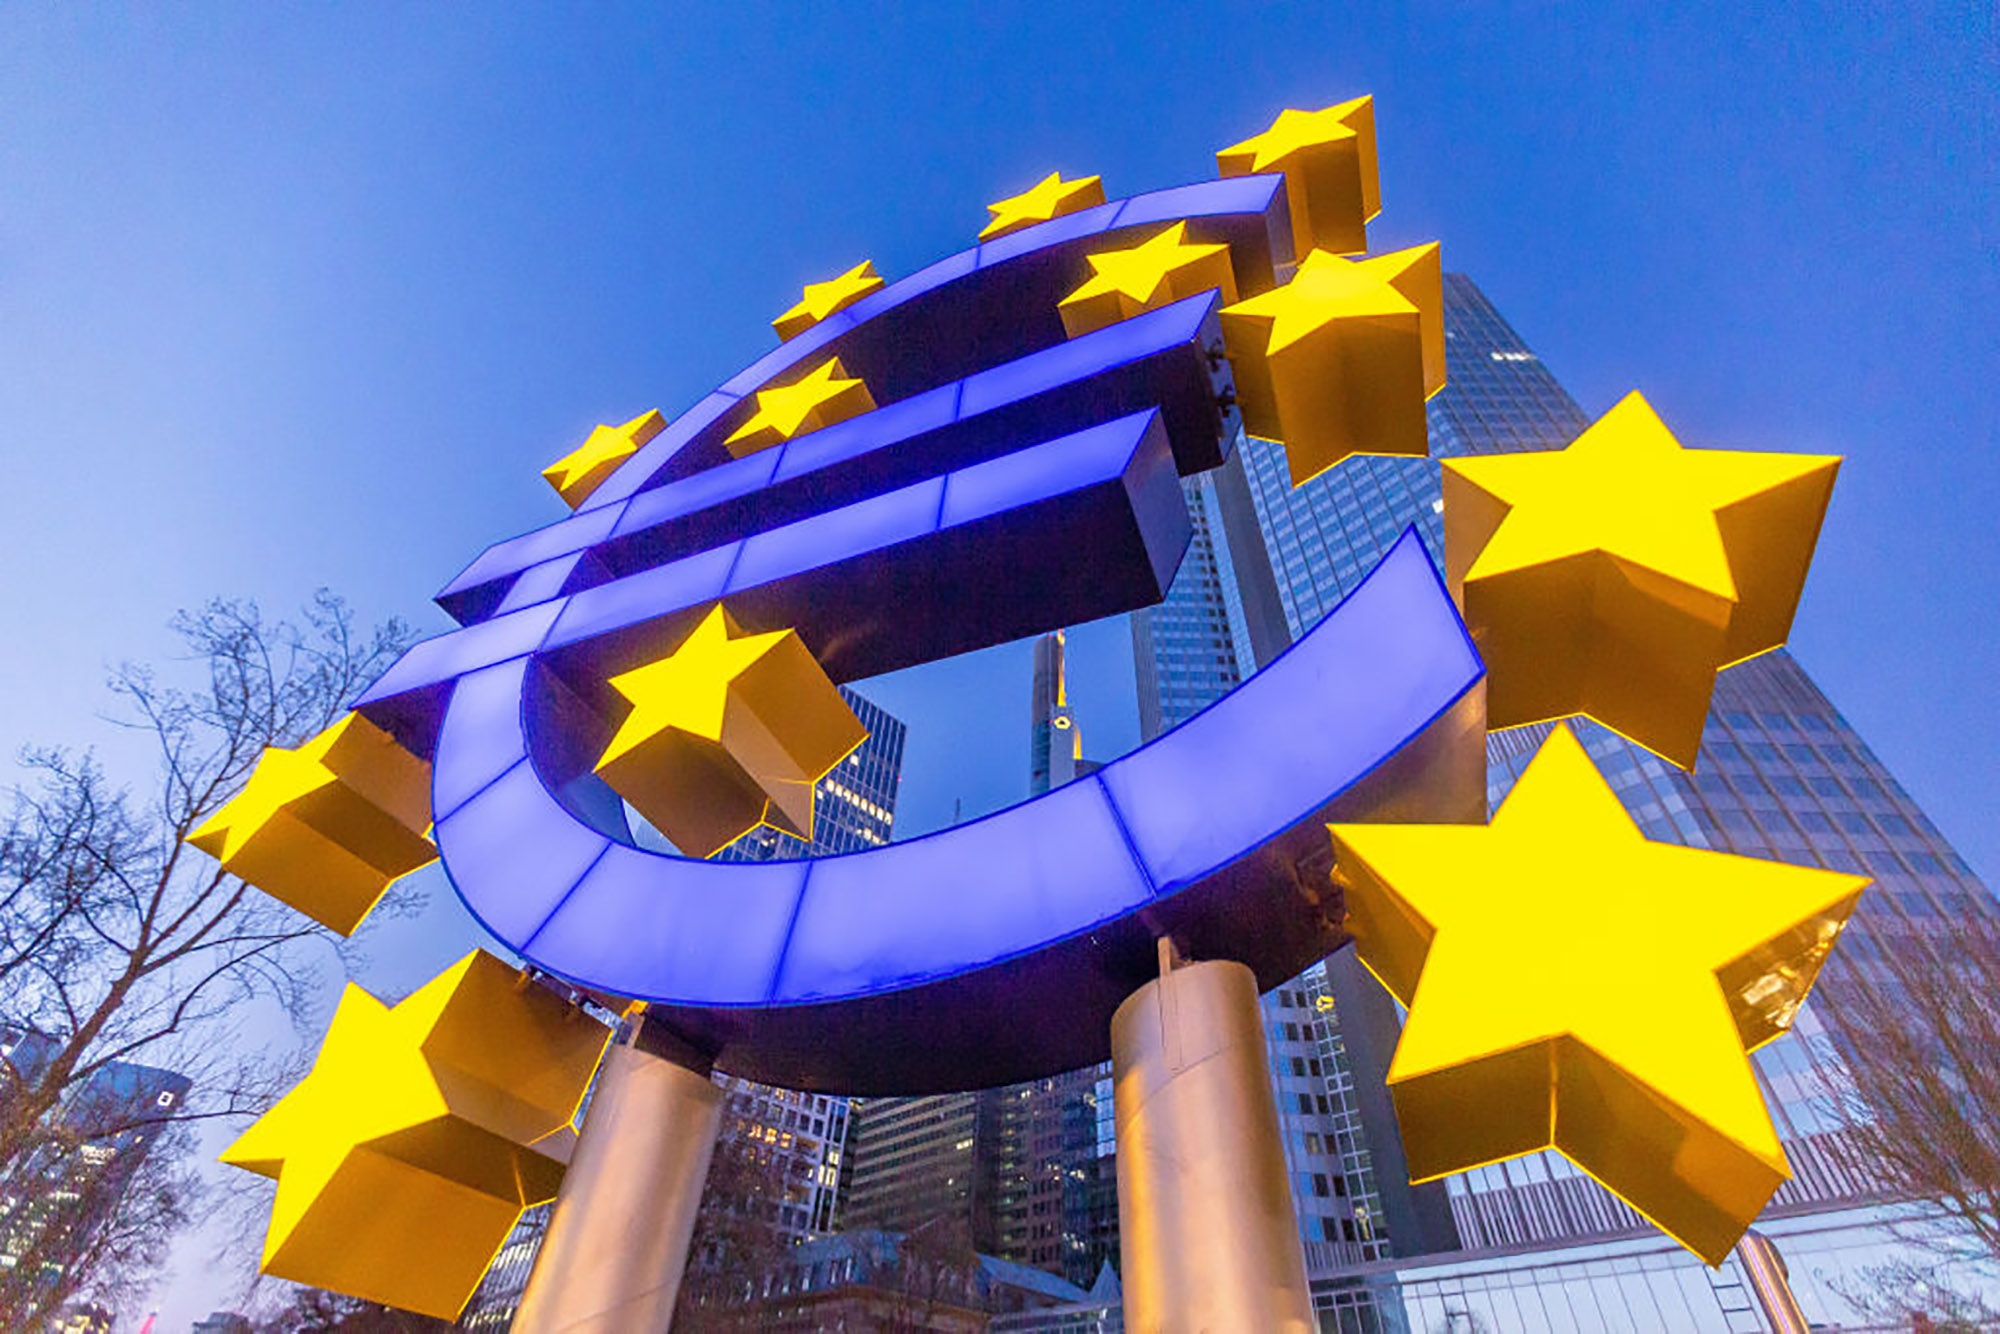 Sculpture with the euro logo in front of the European Central Bank building in Frankfurt.